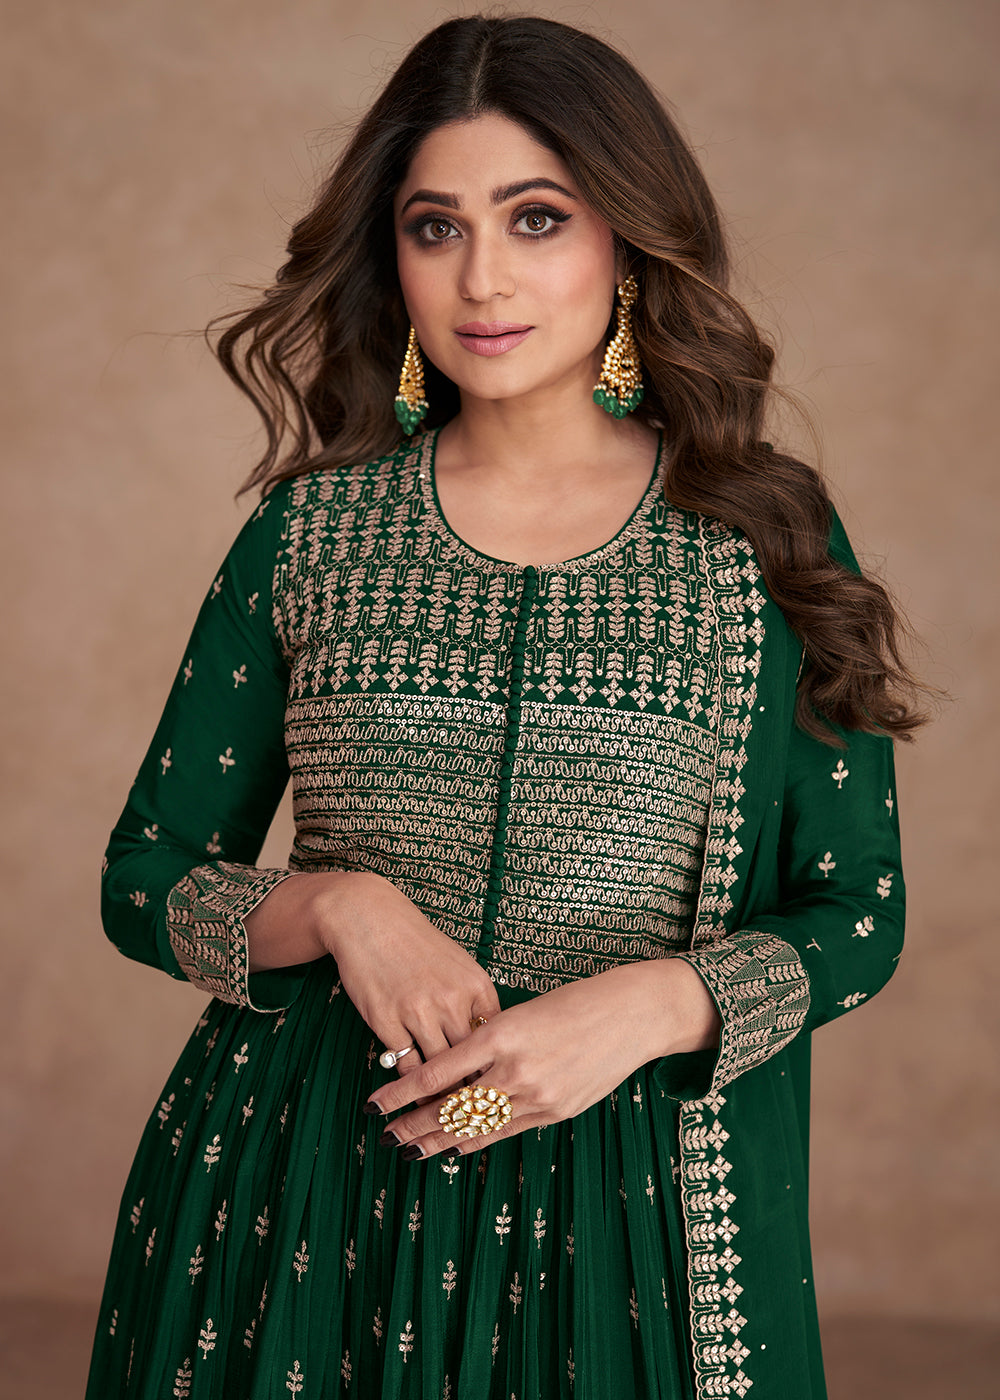 Buy Now Festive Look Gorgeous Green Zari Embroidered Palazzo Suit Online in USA, UK, Canada, Germany, Australia & Worldwide at Empress Clothing.